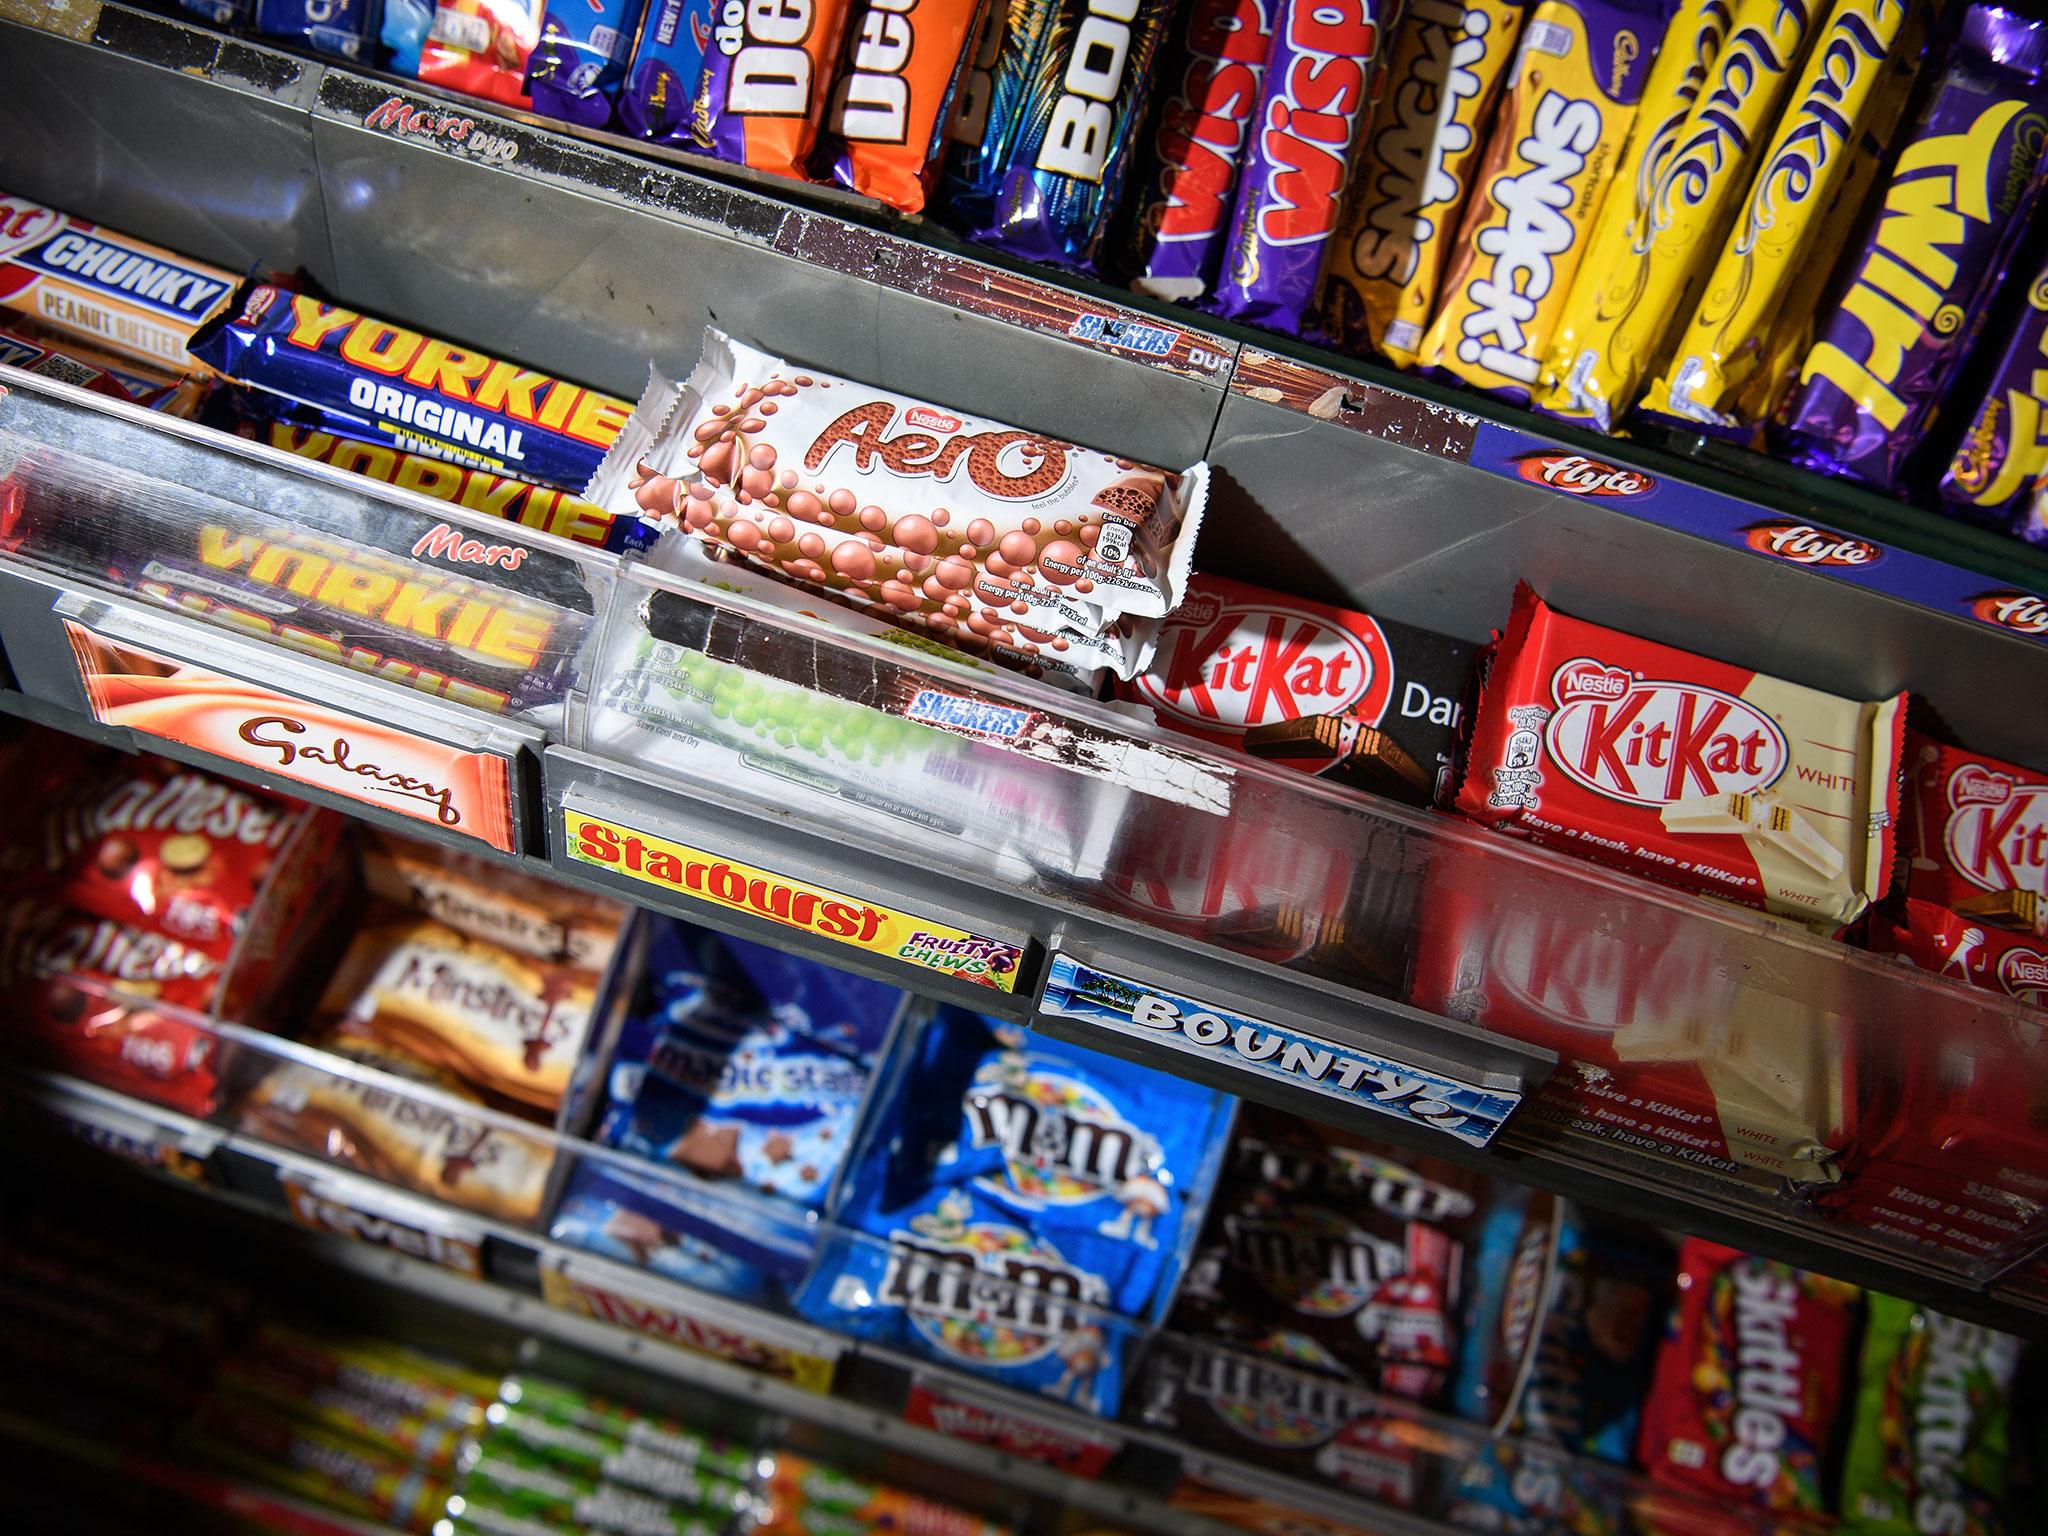 There are no plans to change the £1.50 price tag of the Maltesers, M&M's and Minstrels price tags